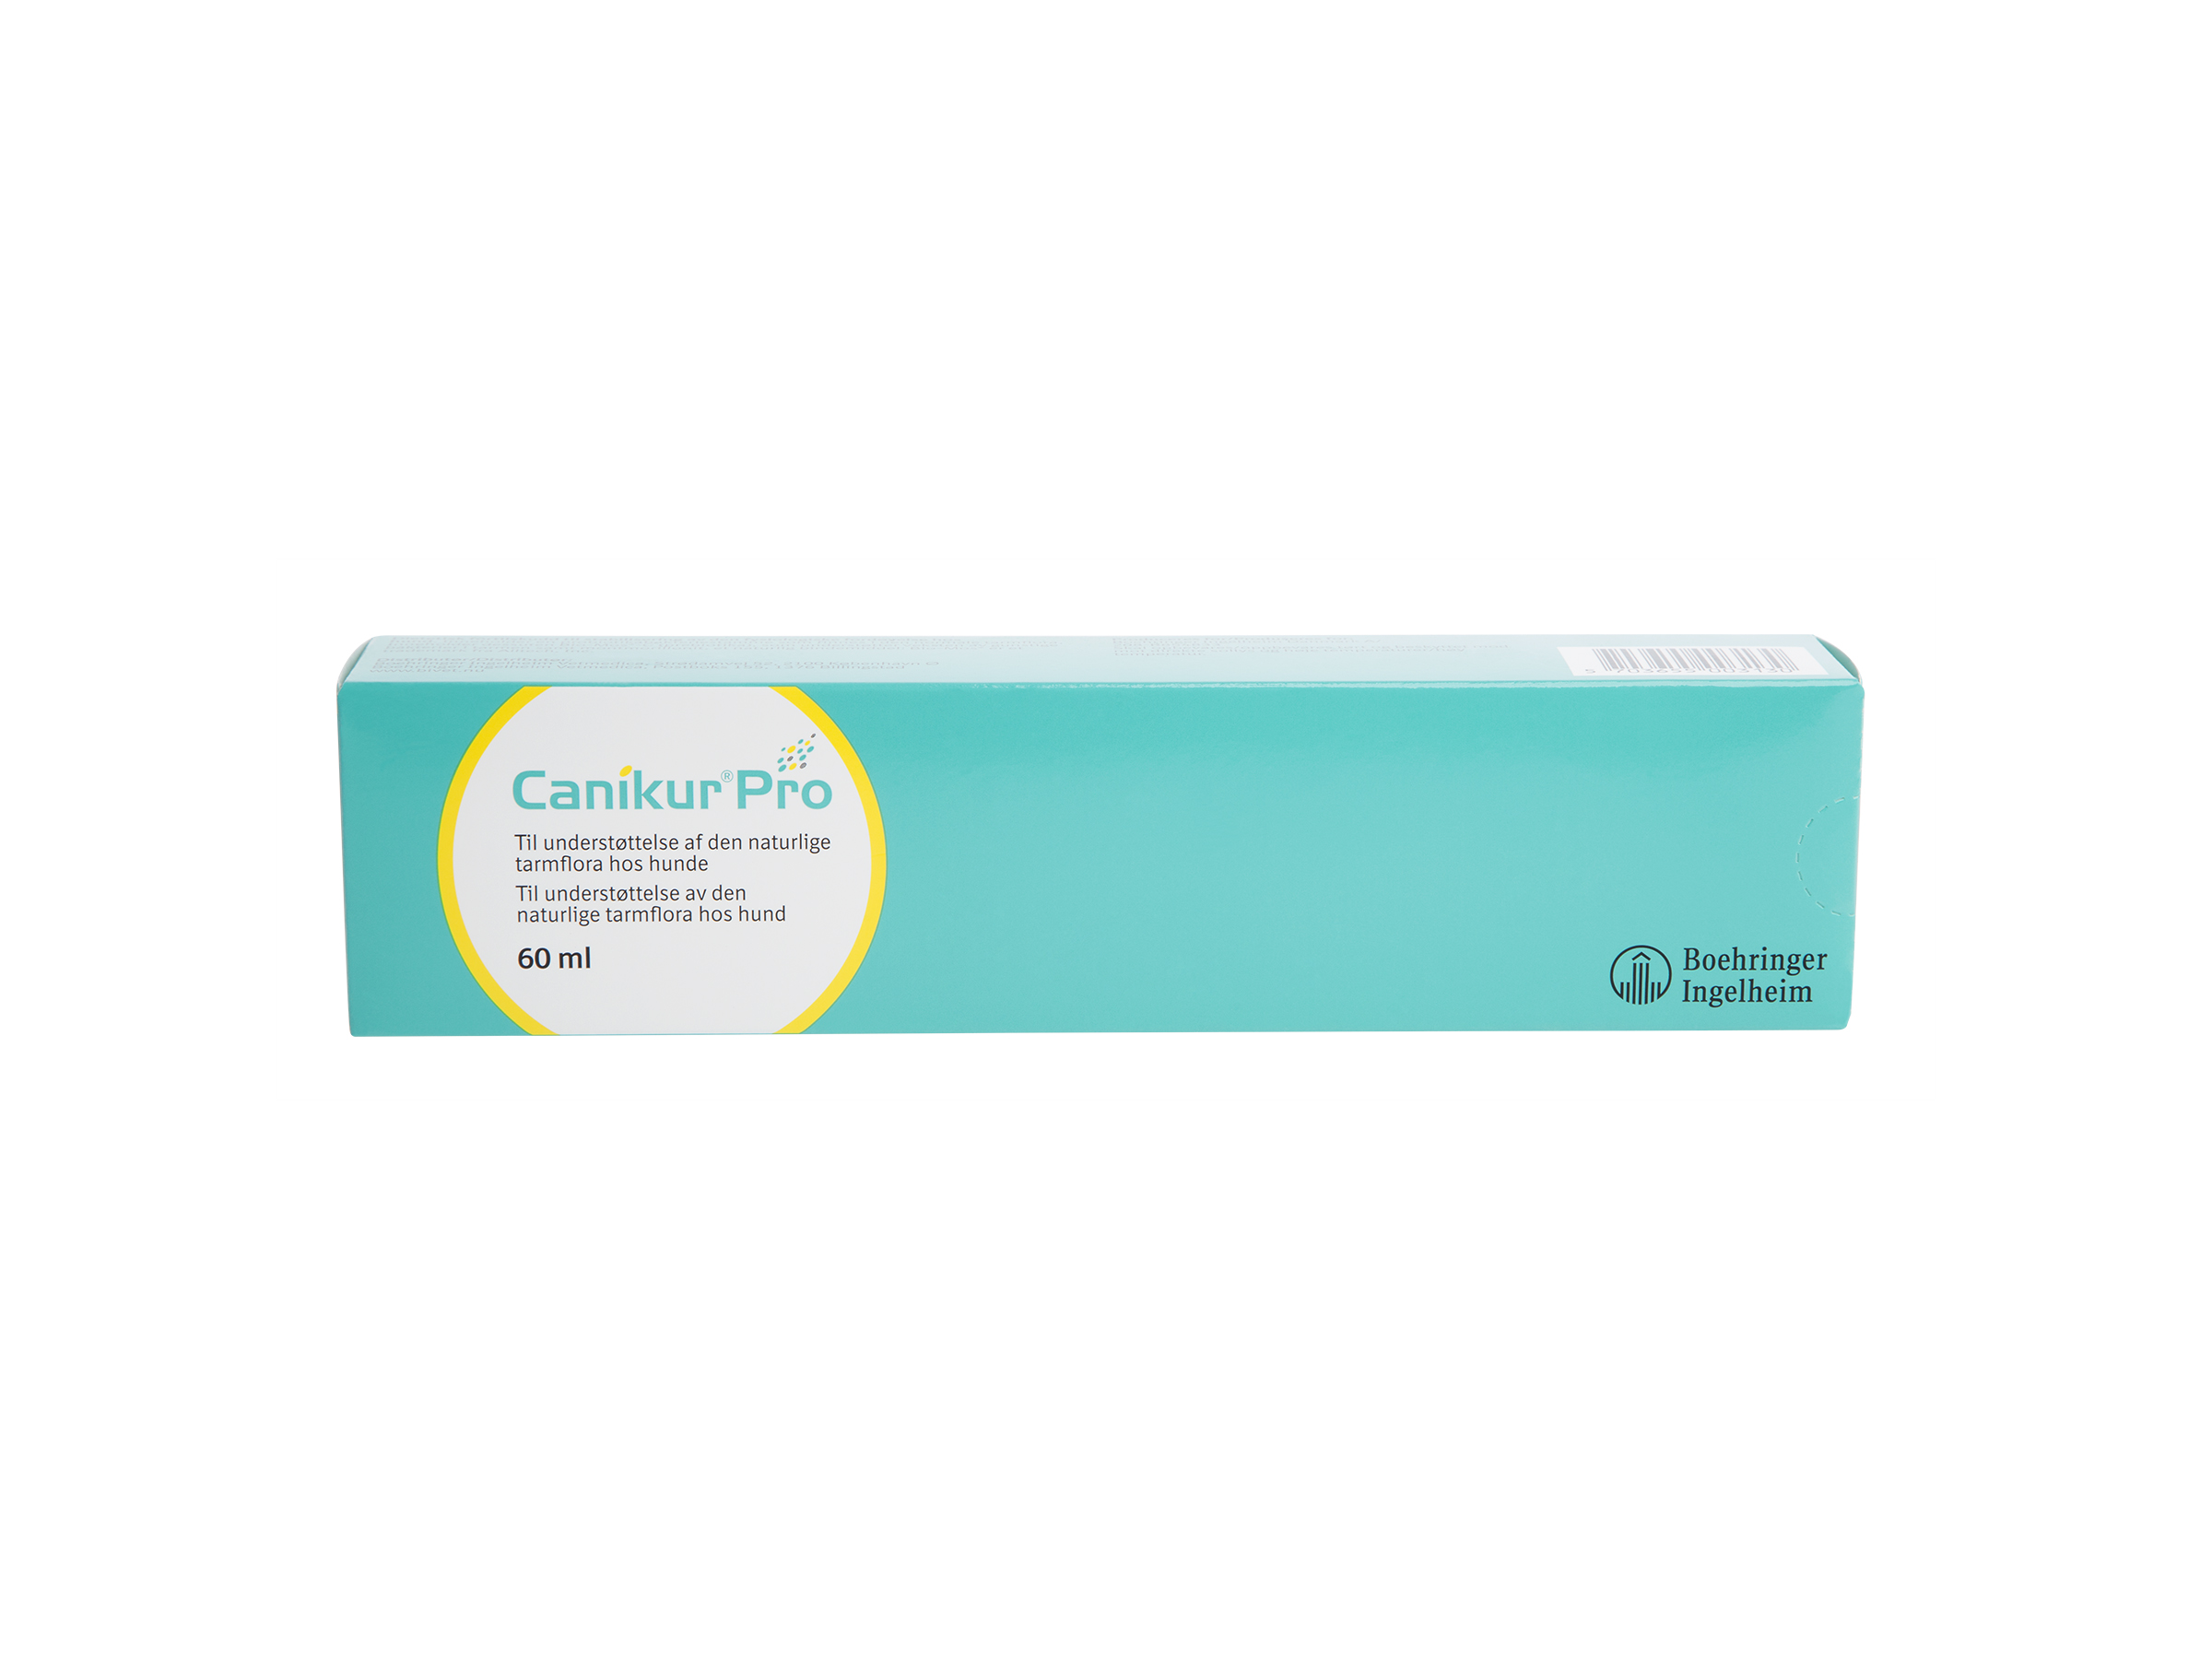 Canikur Canikur Pro pasta, fortilskudd, 60 ml